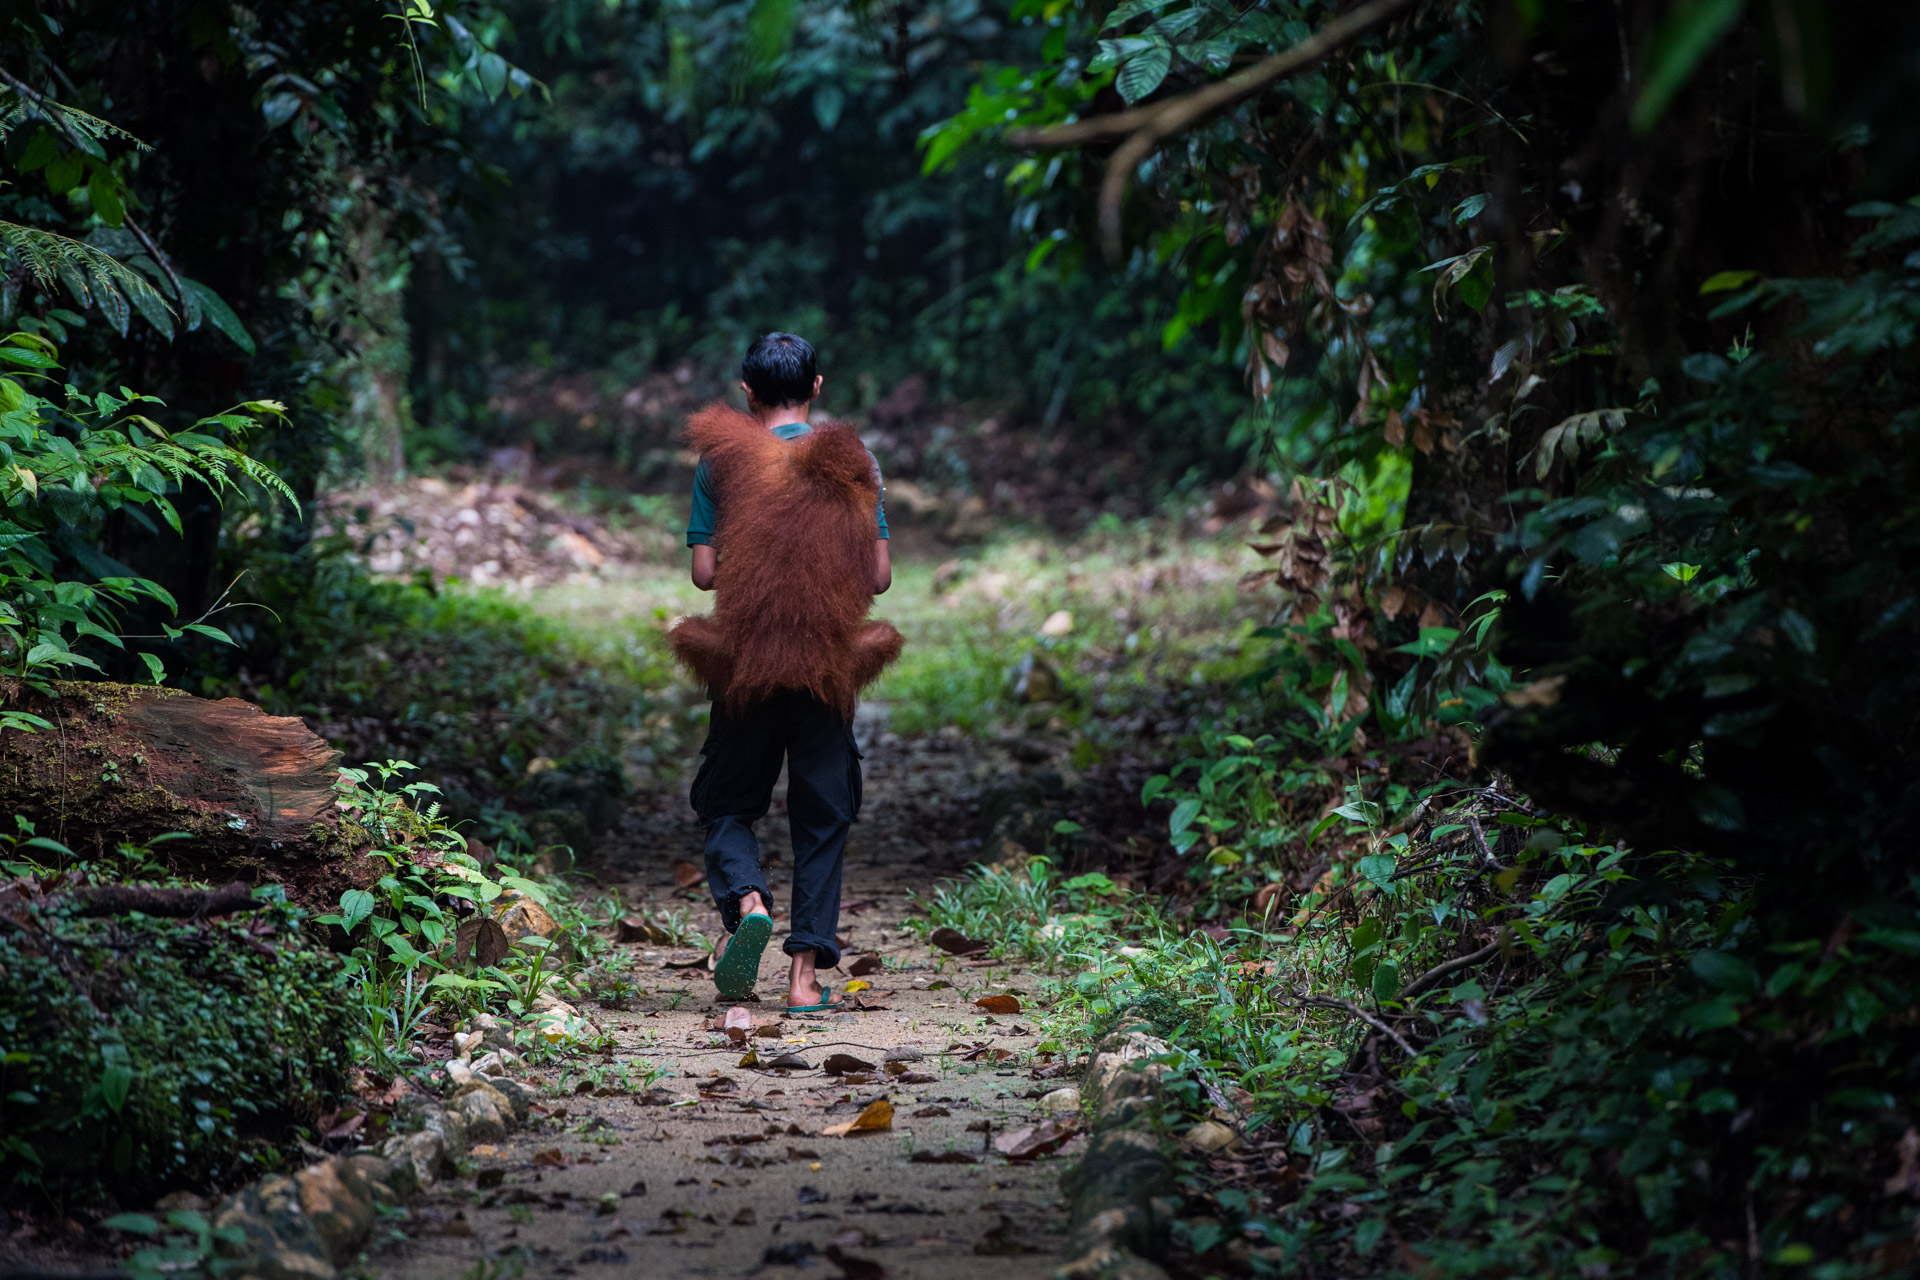 Muhammad Arifin (33), a biologist from Central Java, with Willy Tasbih, an 11-year old female Sumatran Orangutan (Pongo abelii) being released into a protected forest near Bukit Tigapuluh National Park. The Frankfurt Zoological Society, The Orangutan Project, and the World Wildlife Fund have been campaigning to obtain the management rights for two forestry concession blocks adjacent to the Bukit Tigapuluh National Park in Sumatra, Indonesia. Recently, the Indonesian Ministry of Environment and Forestry granted the licence for an Ecosystem Restoration Concession, an innovative way to preserve native forest areas from logging. With this new conservation concession 39,000 hectares have been made available to orangutans for at least 60 years. The area directly adjoins the 145,000 hectare Bukit Tigapuluh National Park.